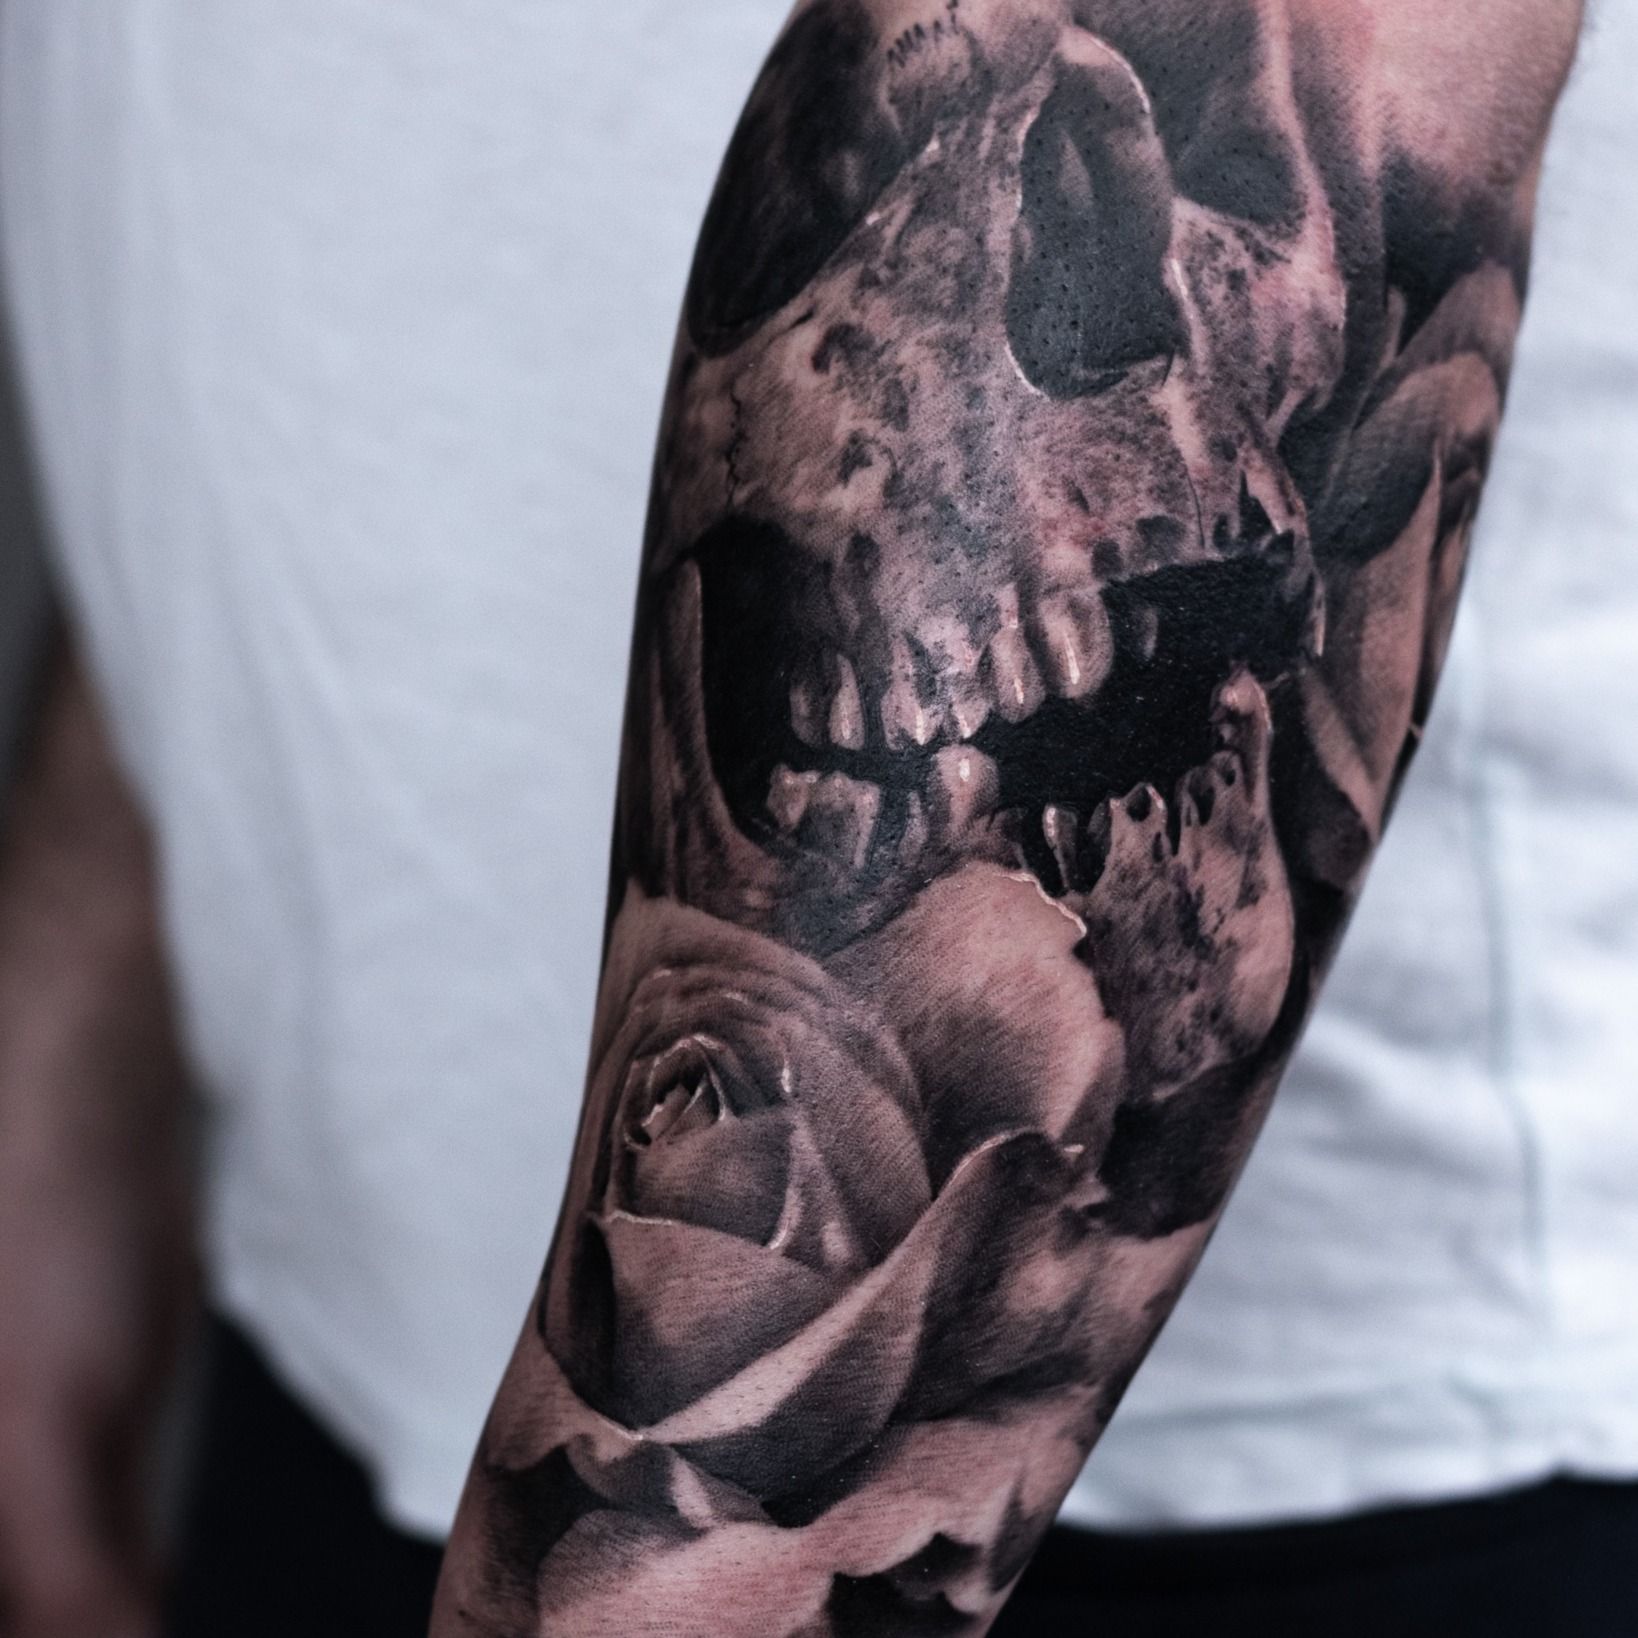 100 Awesome Skull Tattoo Designs  Art and Design  Skull sleeve tattoos  Skull sleeve Skull tattoos